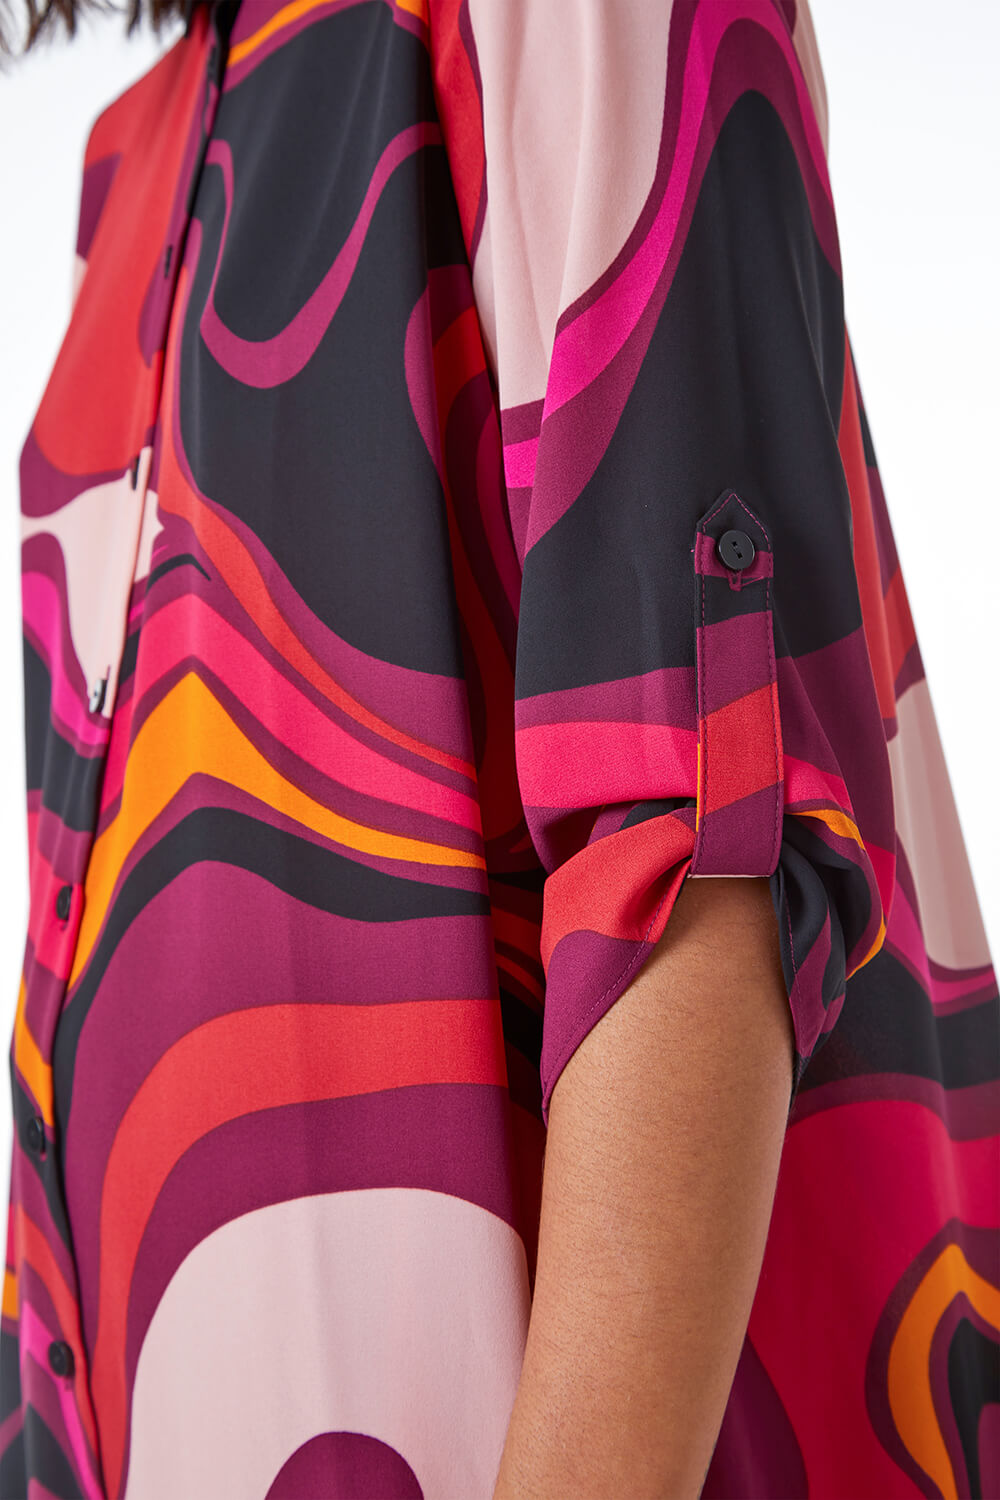 MAGENTA Swirl Print Button Up Tunic Blouse , Image 5 of 5